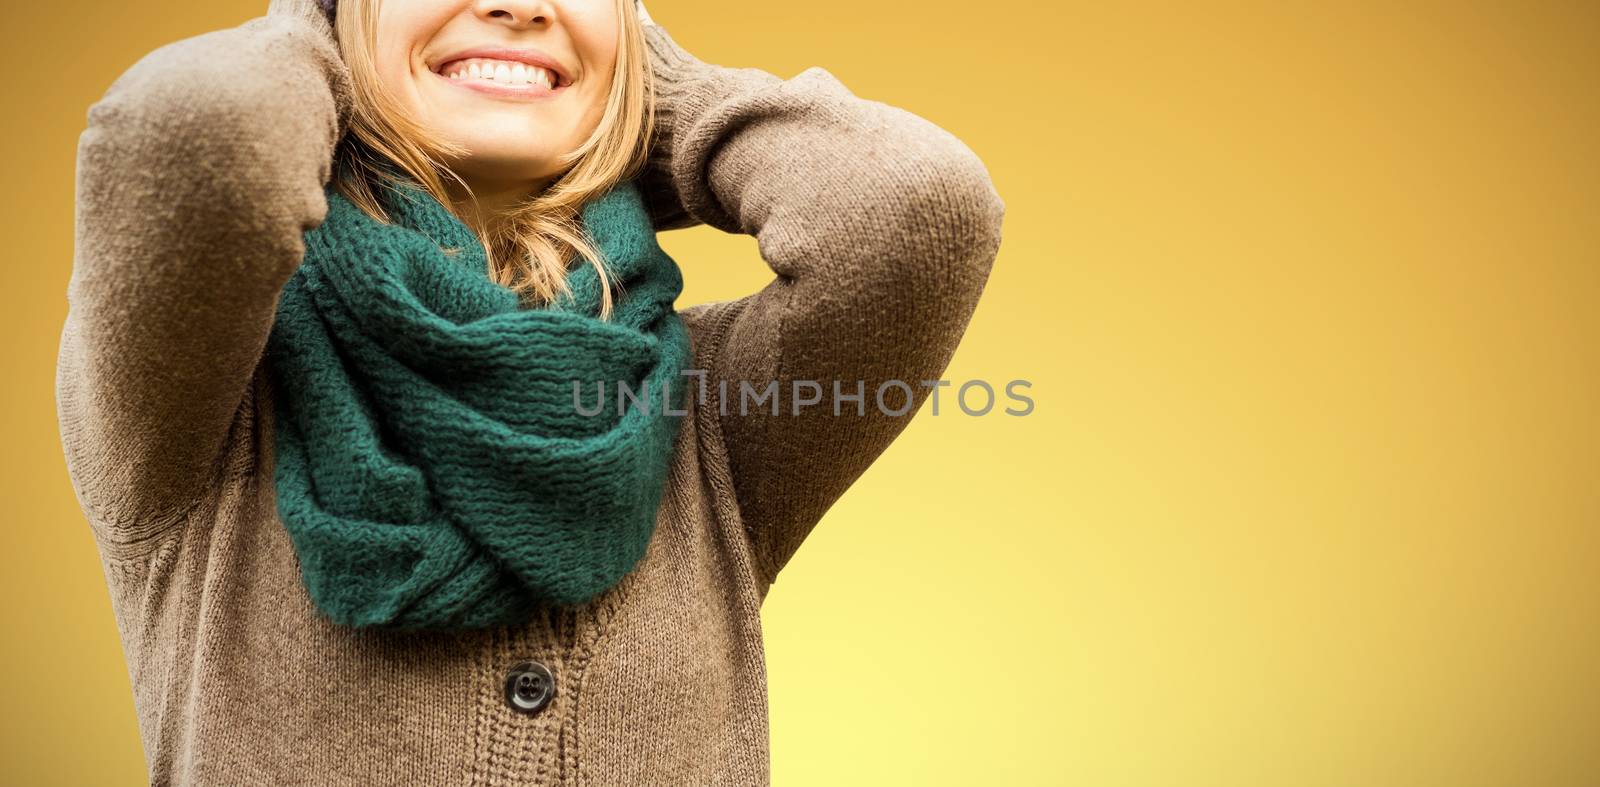  Beautiful blond woman with cap and scarf smiling against abstract yellow background